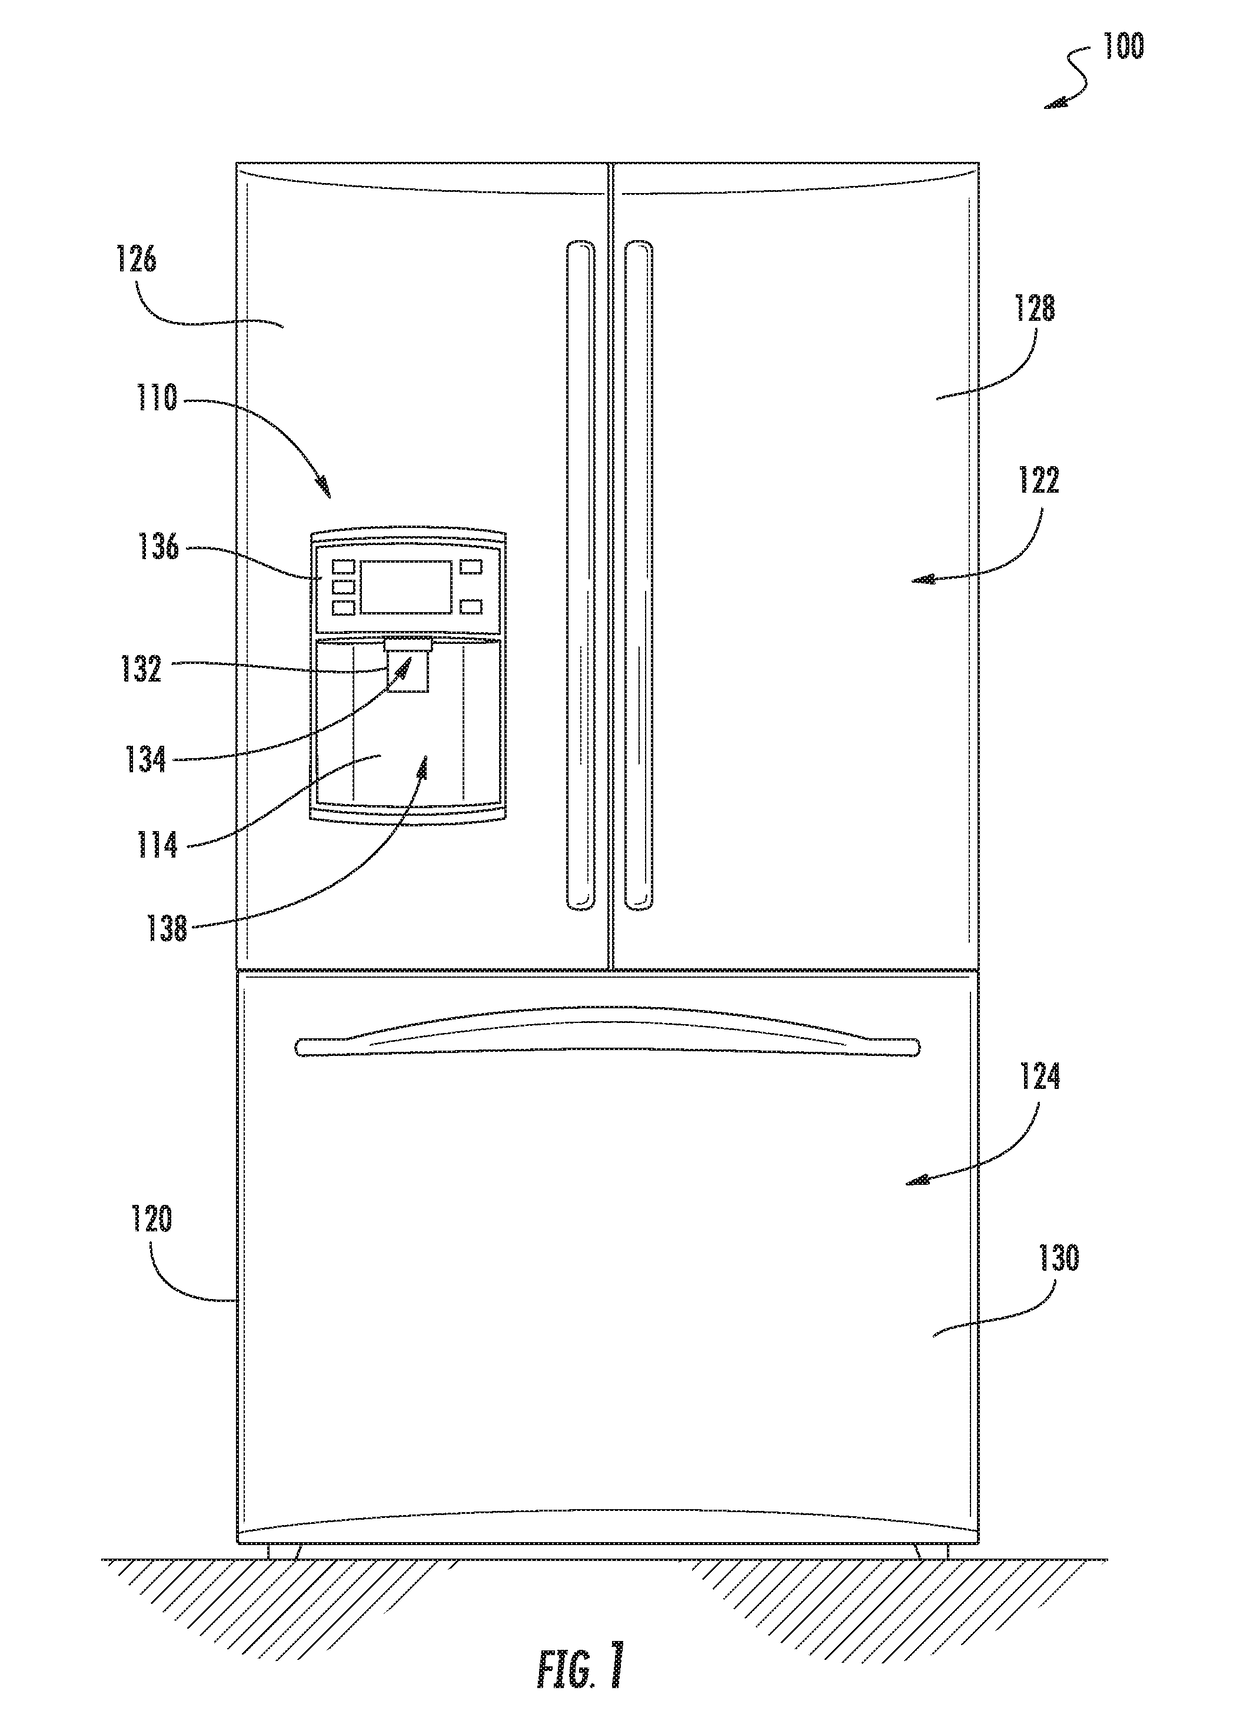 Mixed matrix membrane filtration device for an appliance